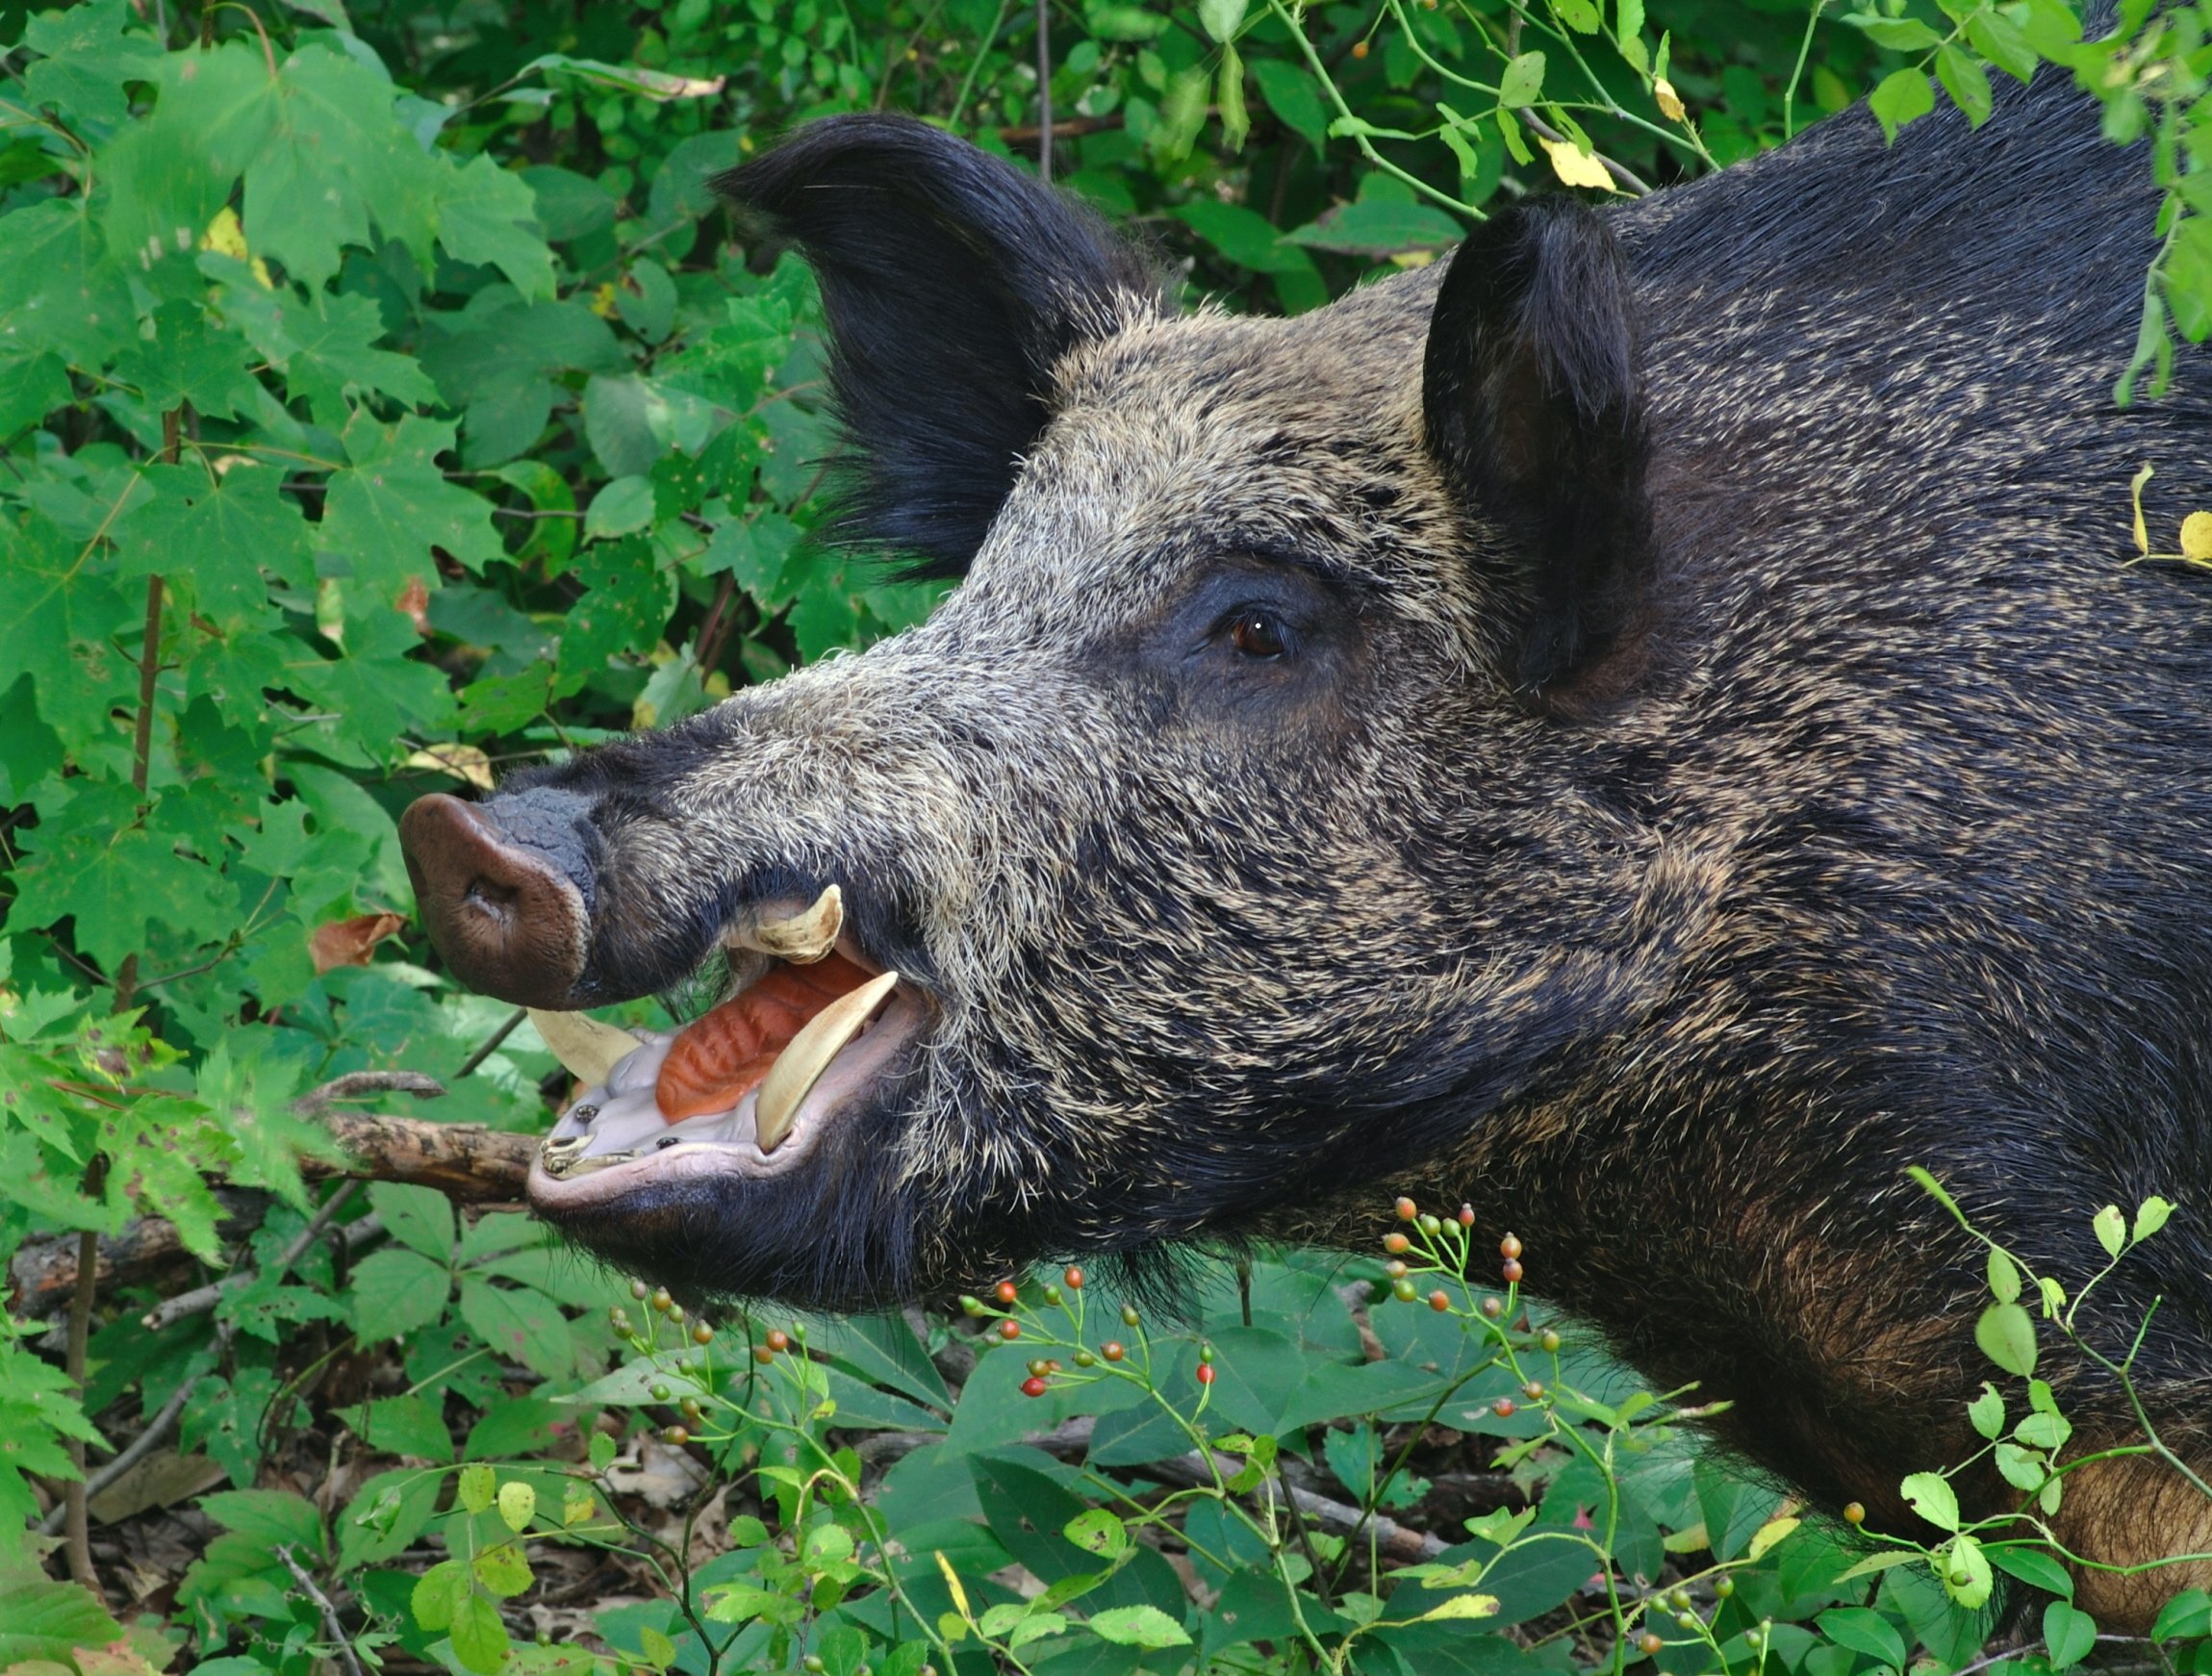 What do feral pig maps say about the feral pig population in the USA?